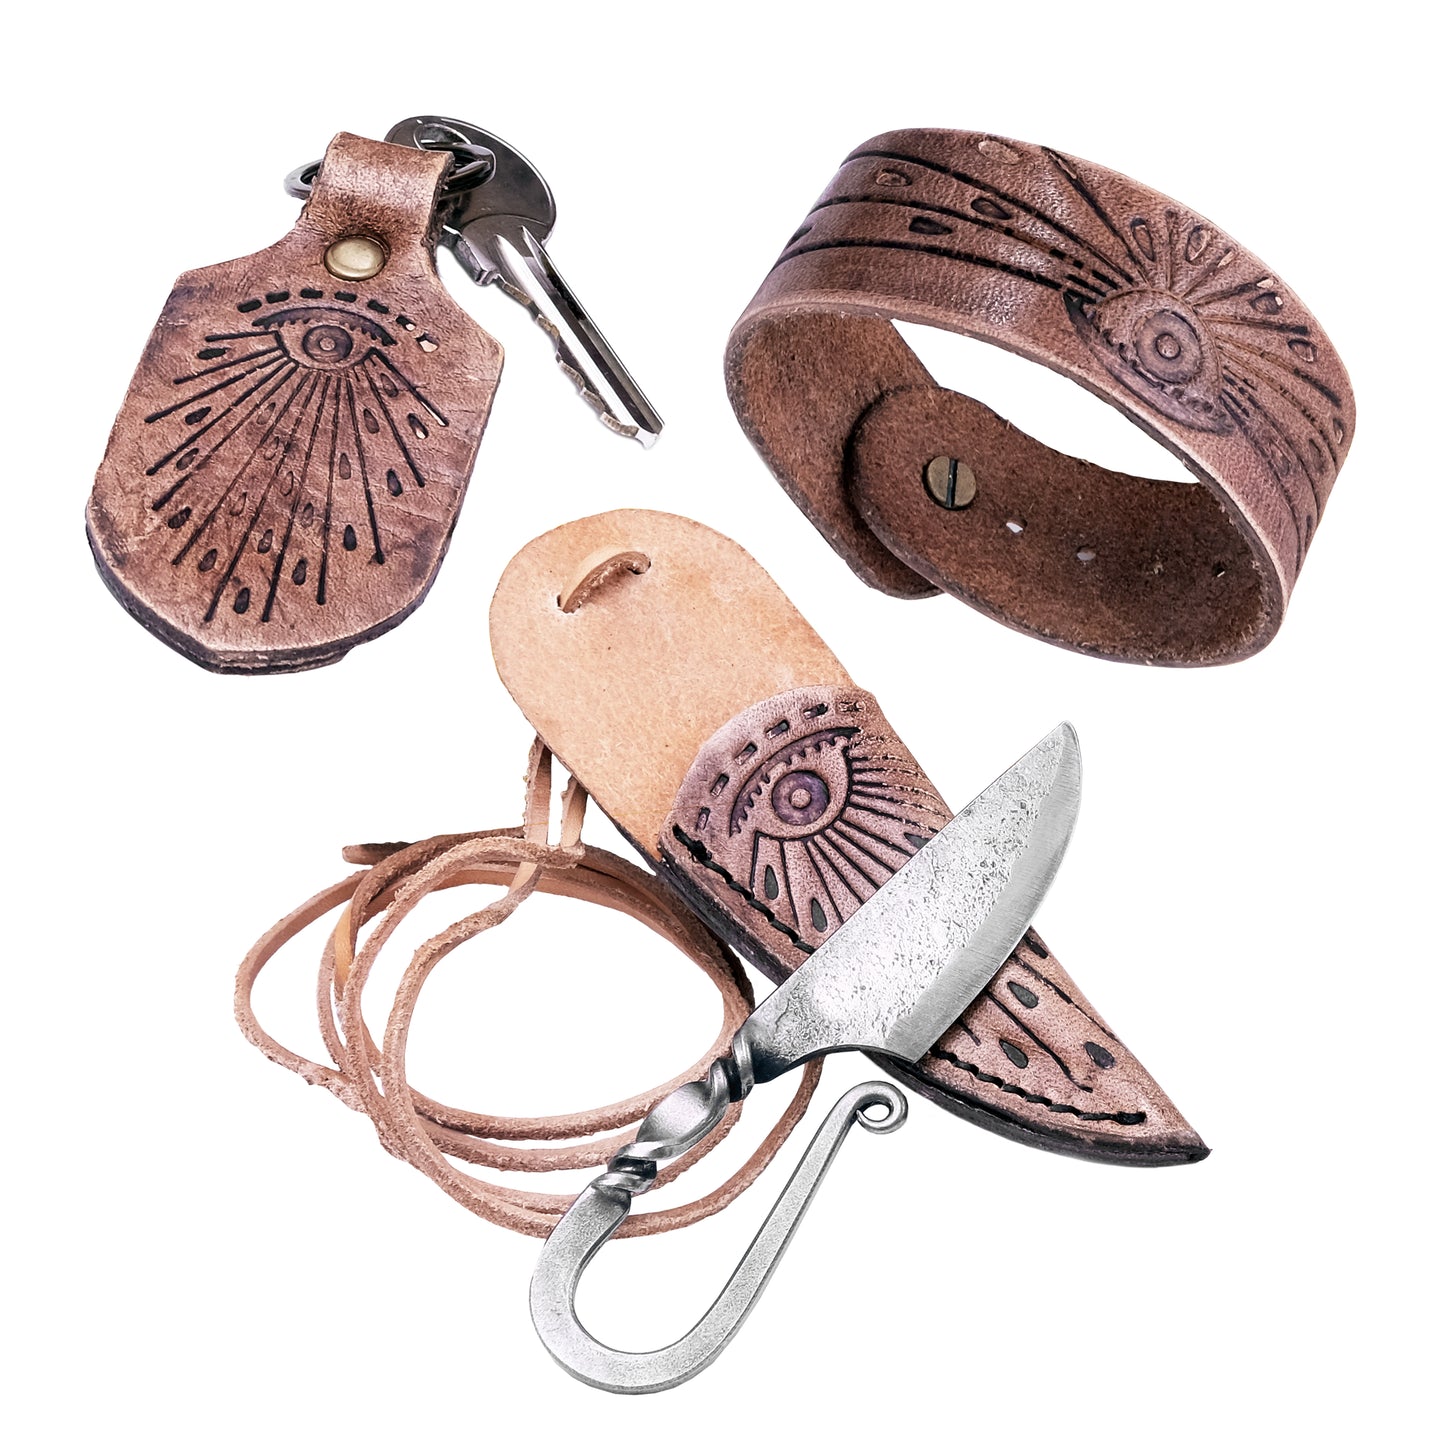 Unique set - forged C3 Celtic knife with scabbard, bracelet and key ring